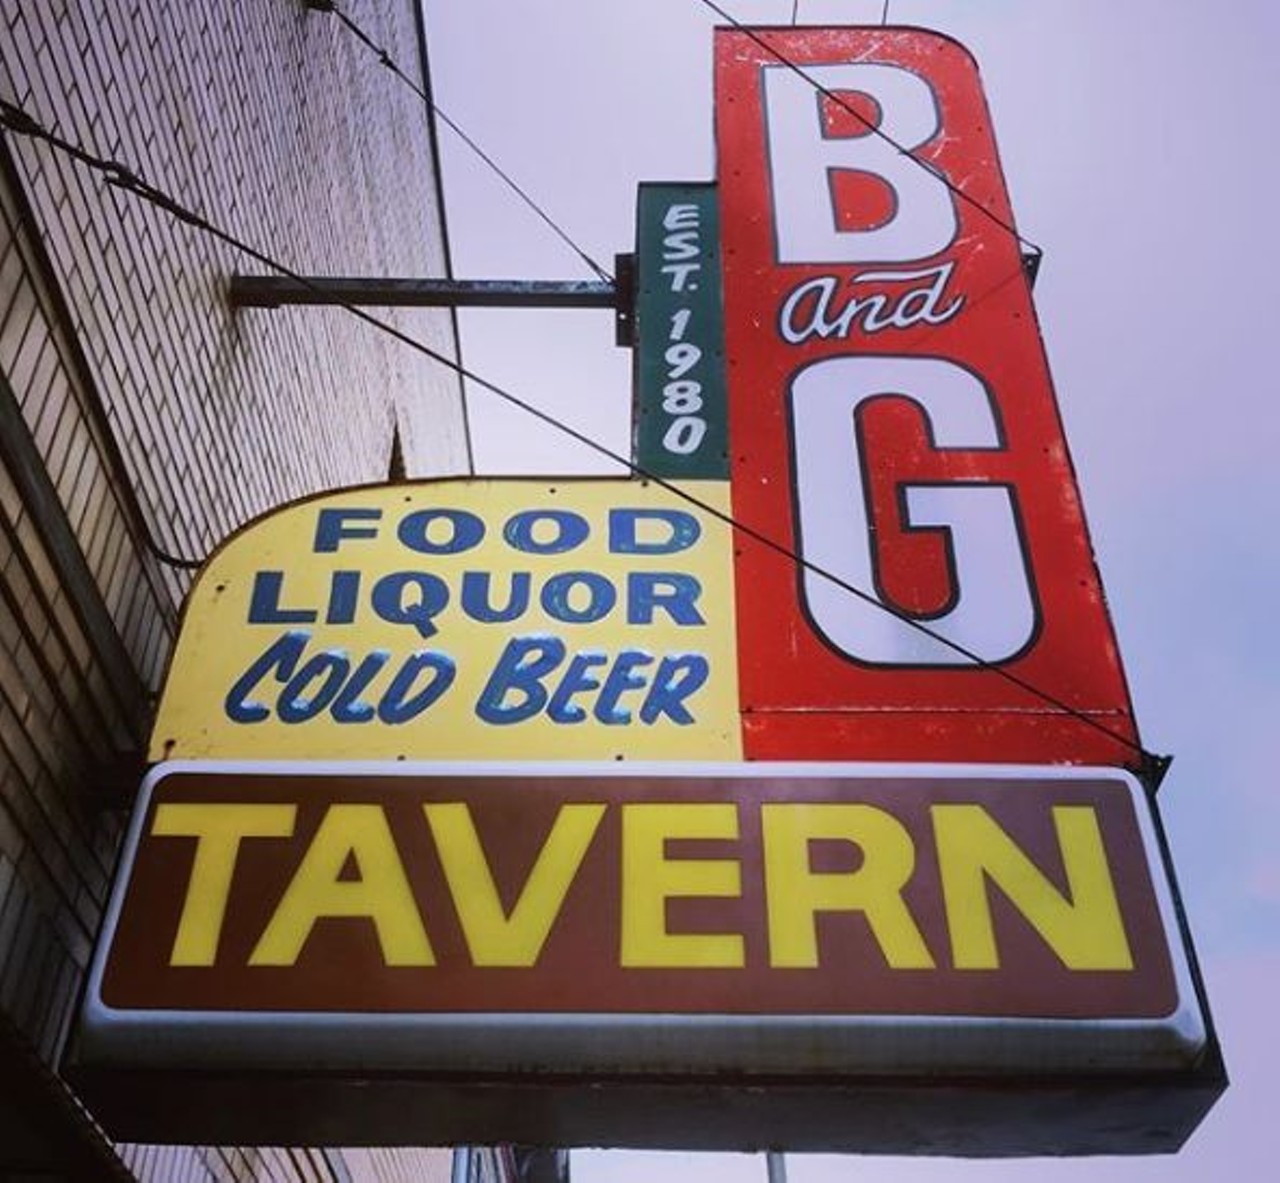  B and G Tavern
4150 Lorain Ave. | (216) 651-0883
This affordable Ohio City long time hangout is lit, thanks to its literal beer light decorations and classic pool table. 
Photo via savage.chicago.yeah/Instagram